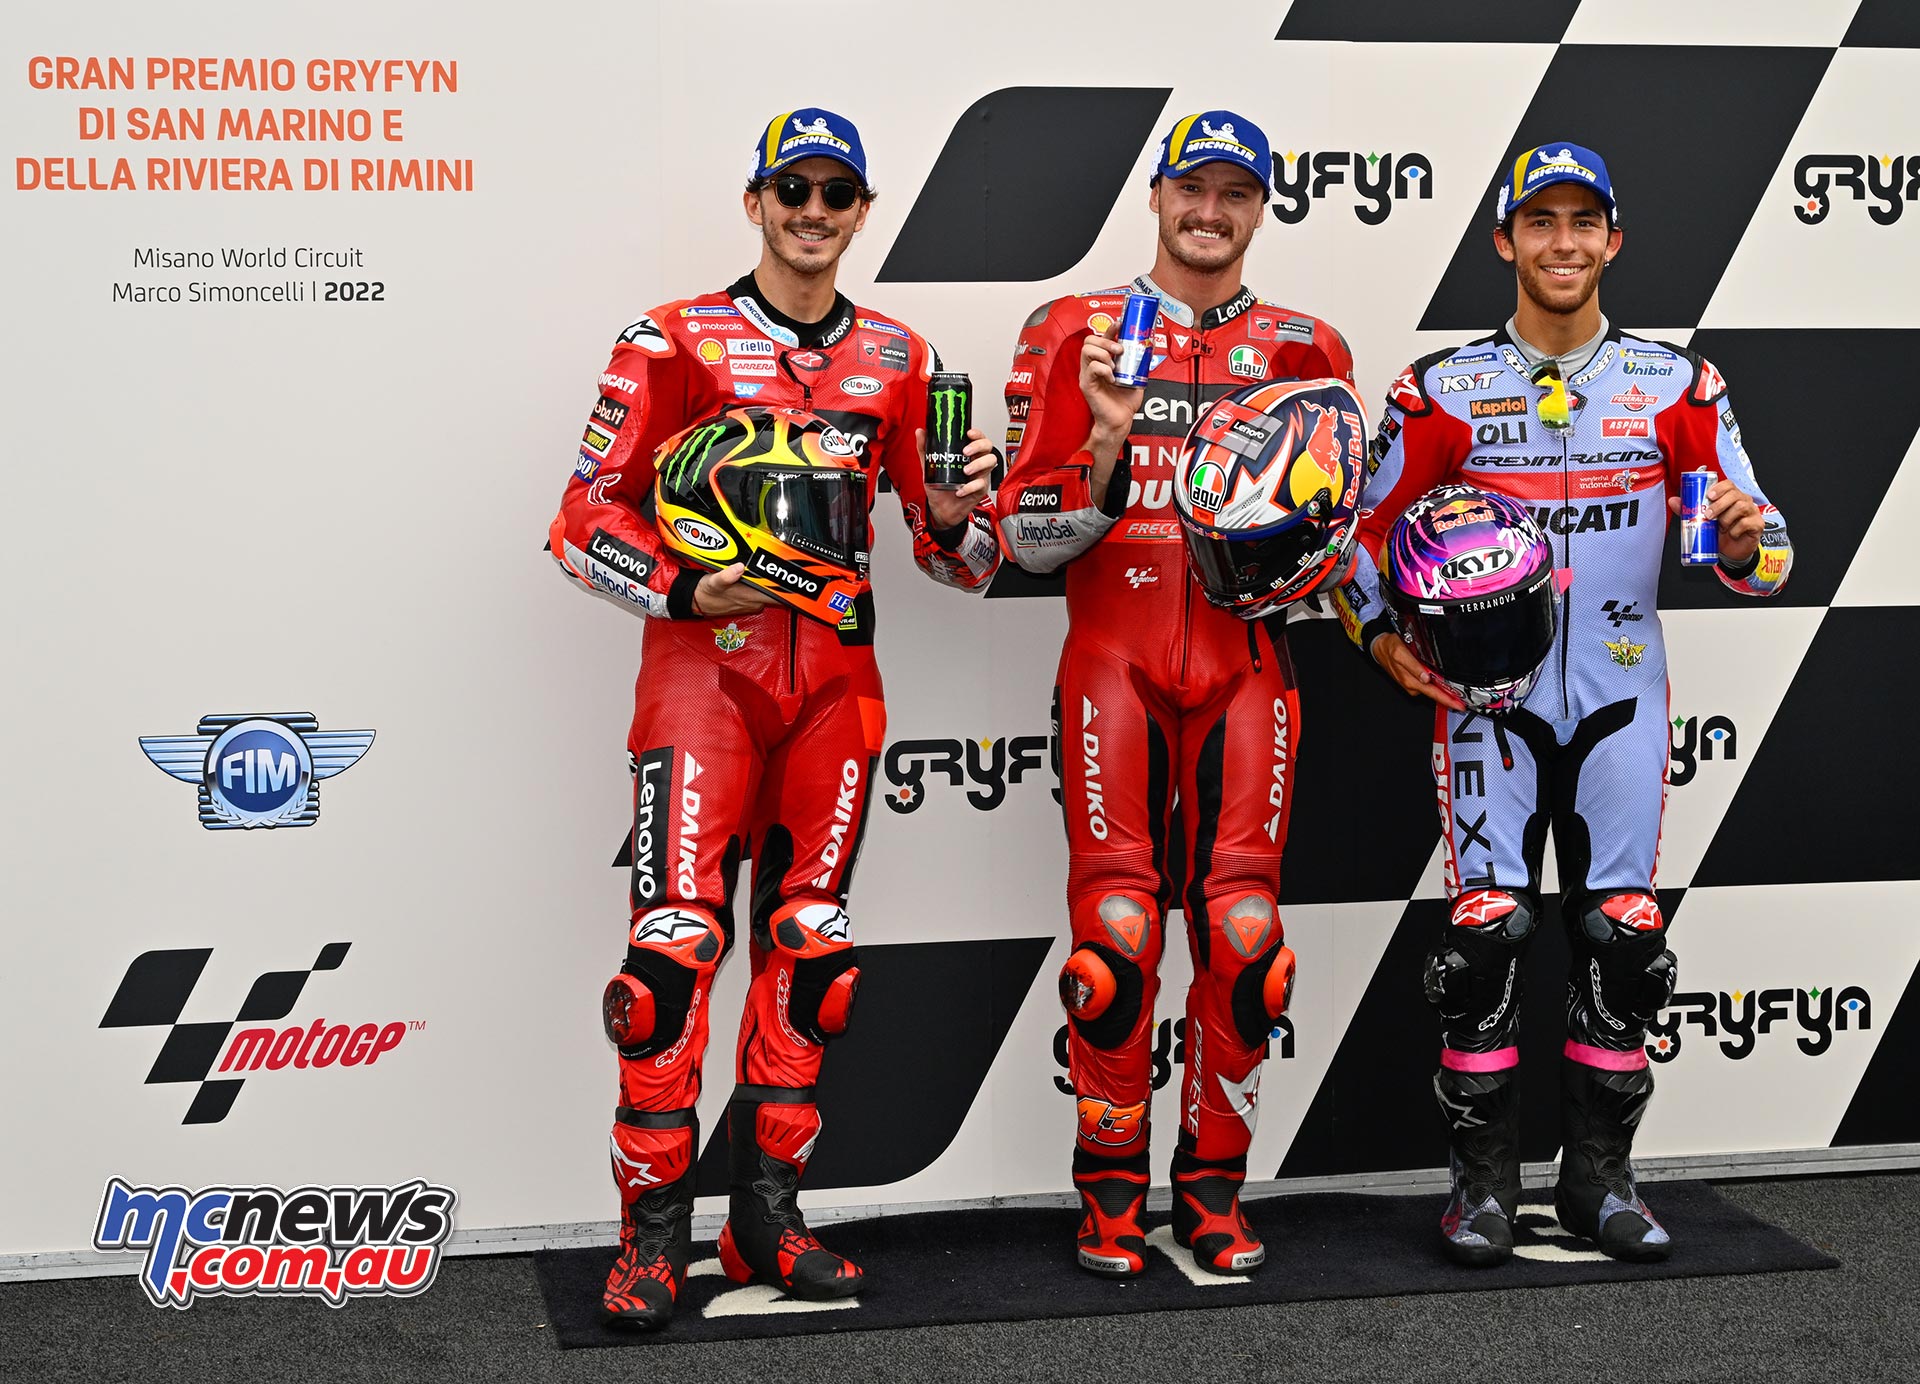 Miller on pole at Misano MotoGP/2/3 Qualifying Results/Reports MCNews